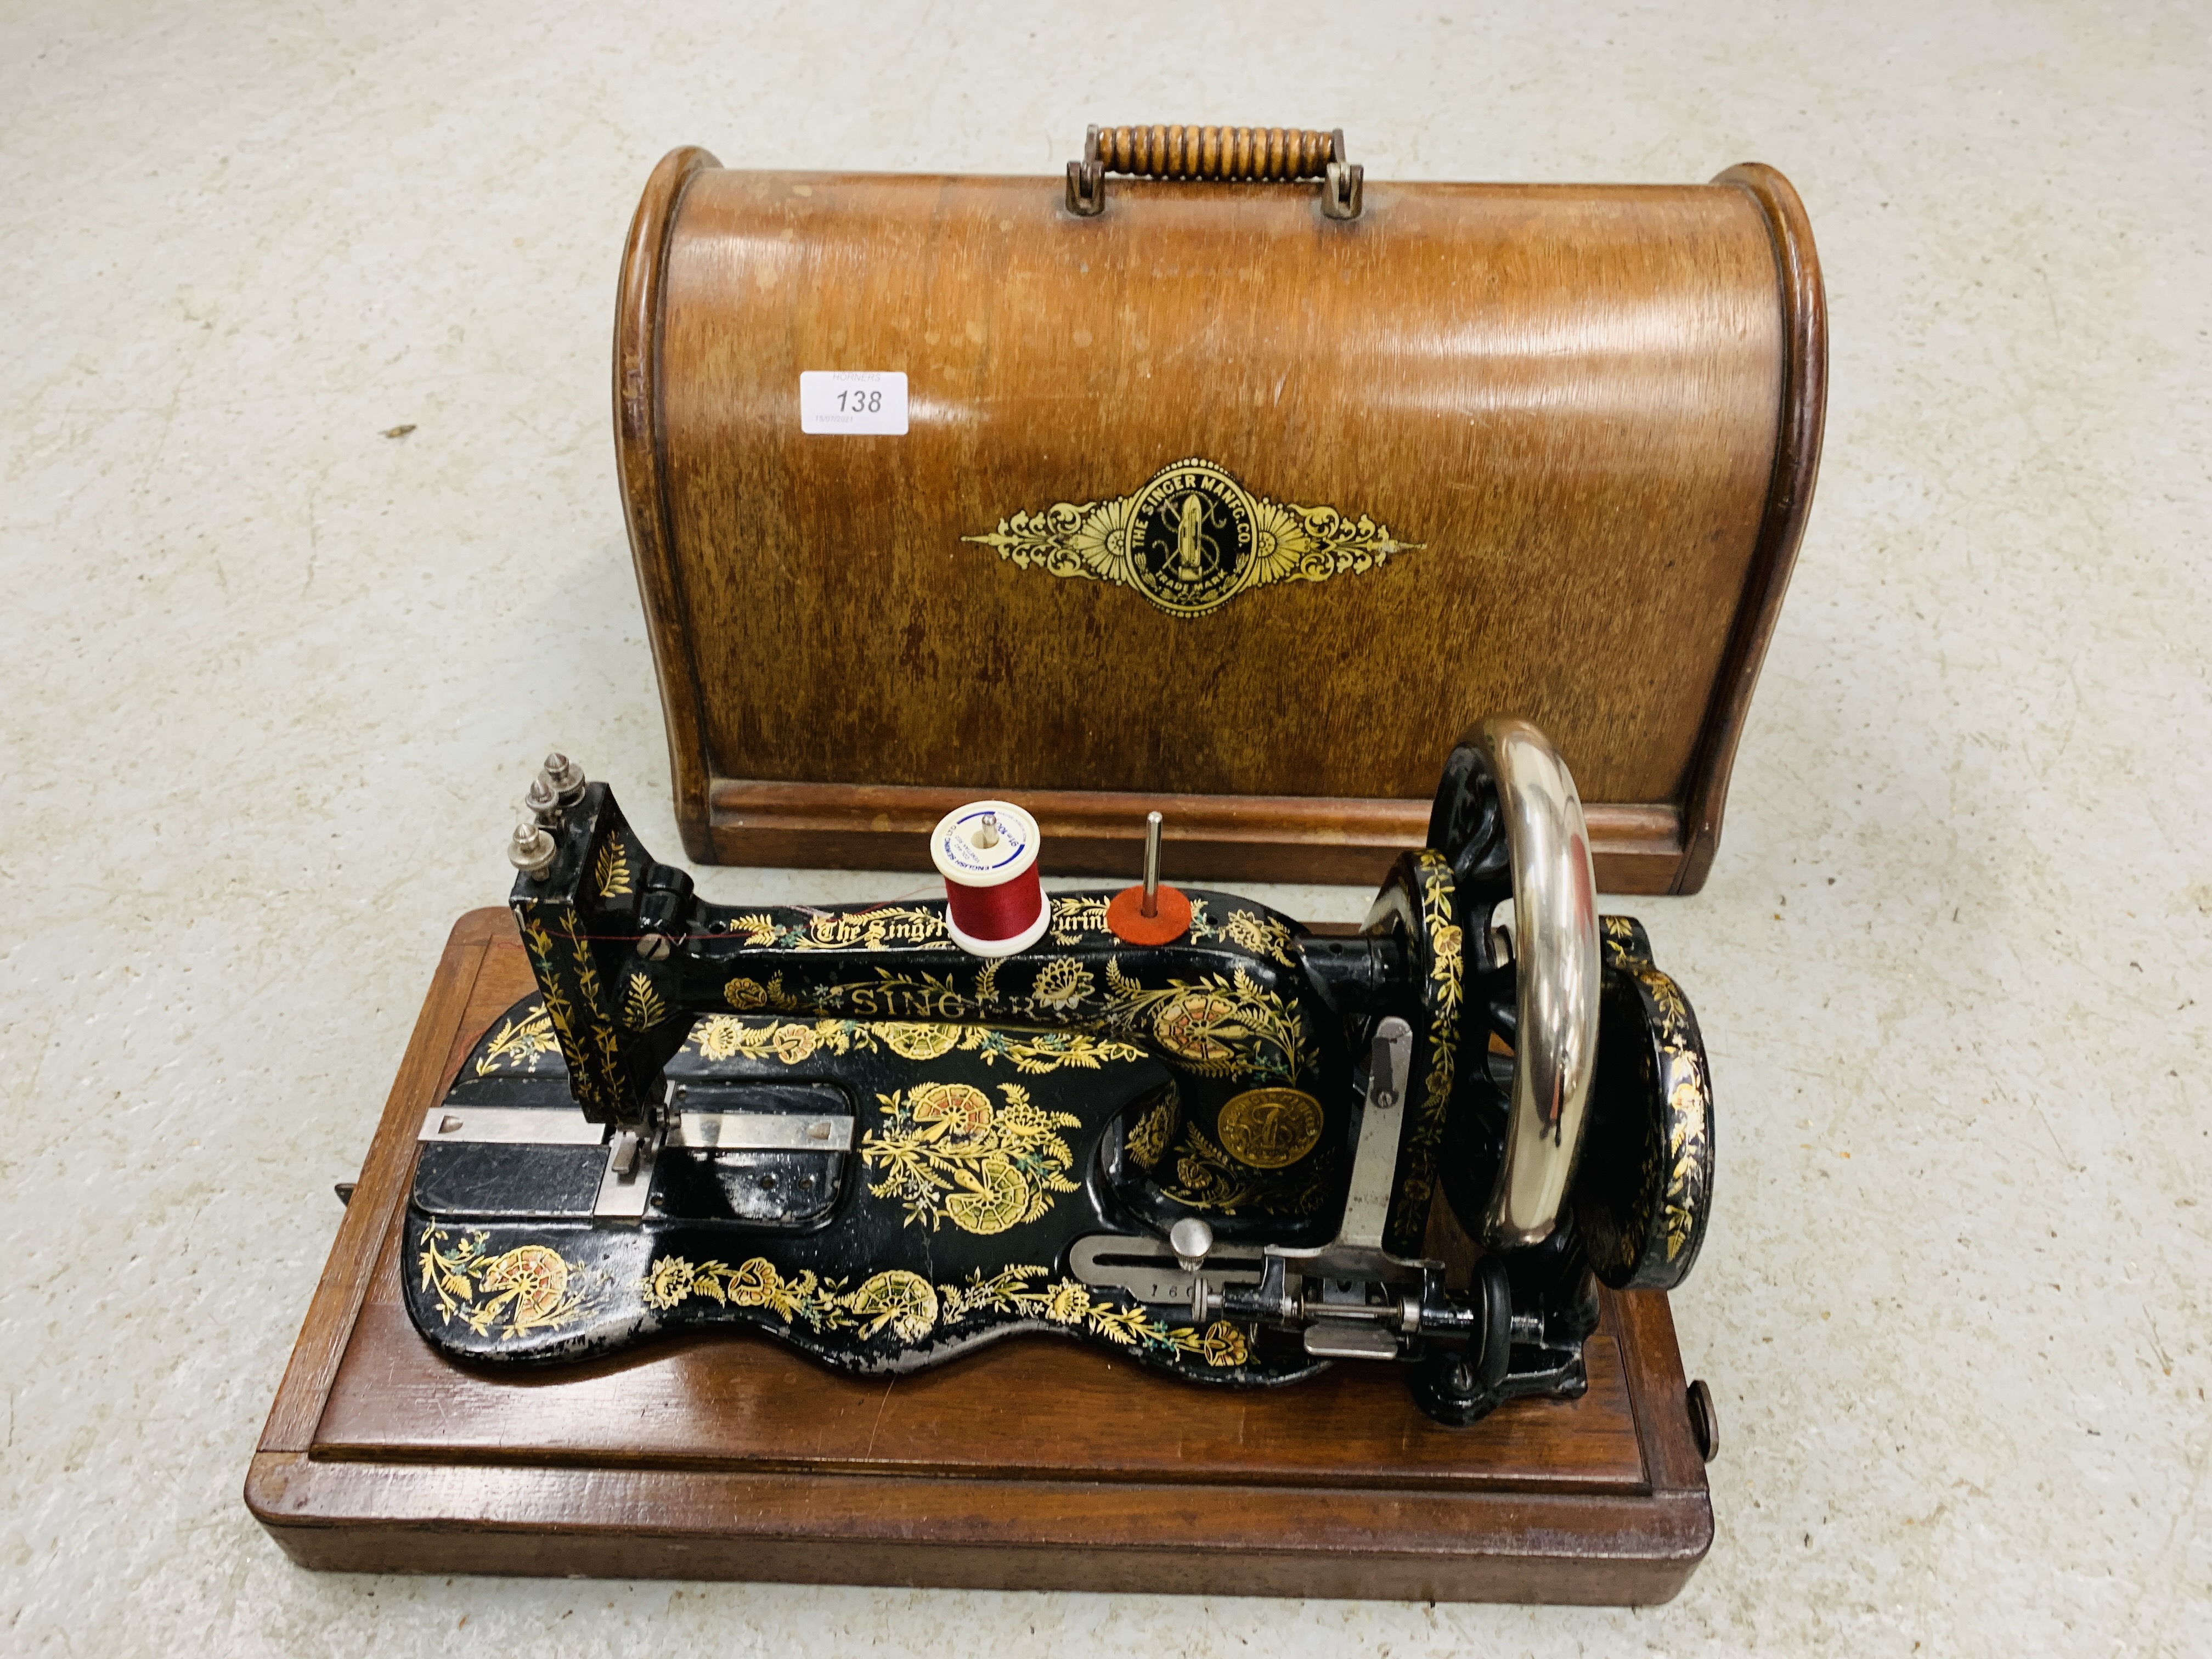 A VINTAGE SINGER GILT DECORATED MANUAL SEWING MACHINE UNDER ORIGINAL DOMED COVER